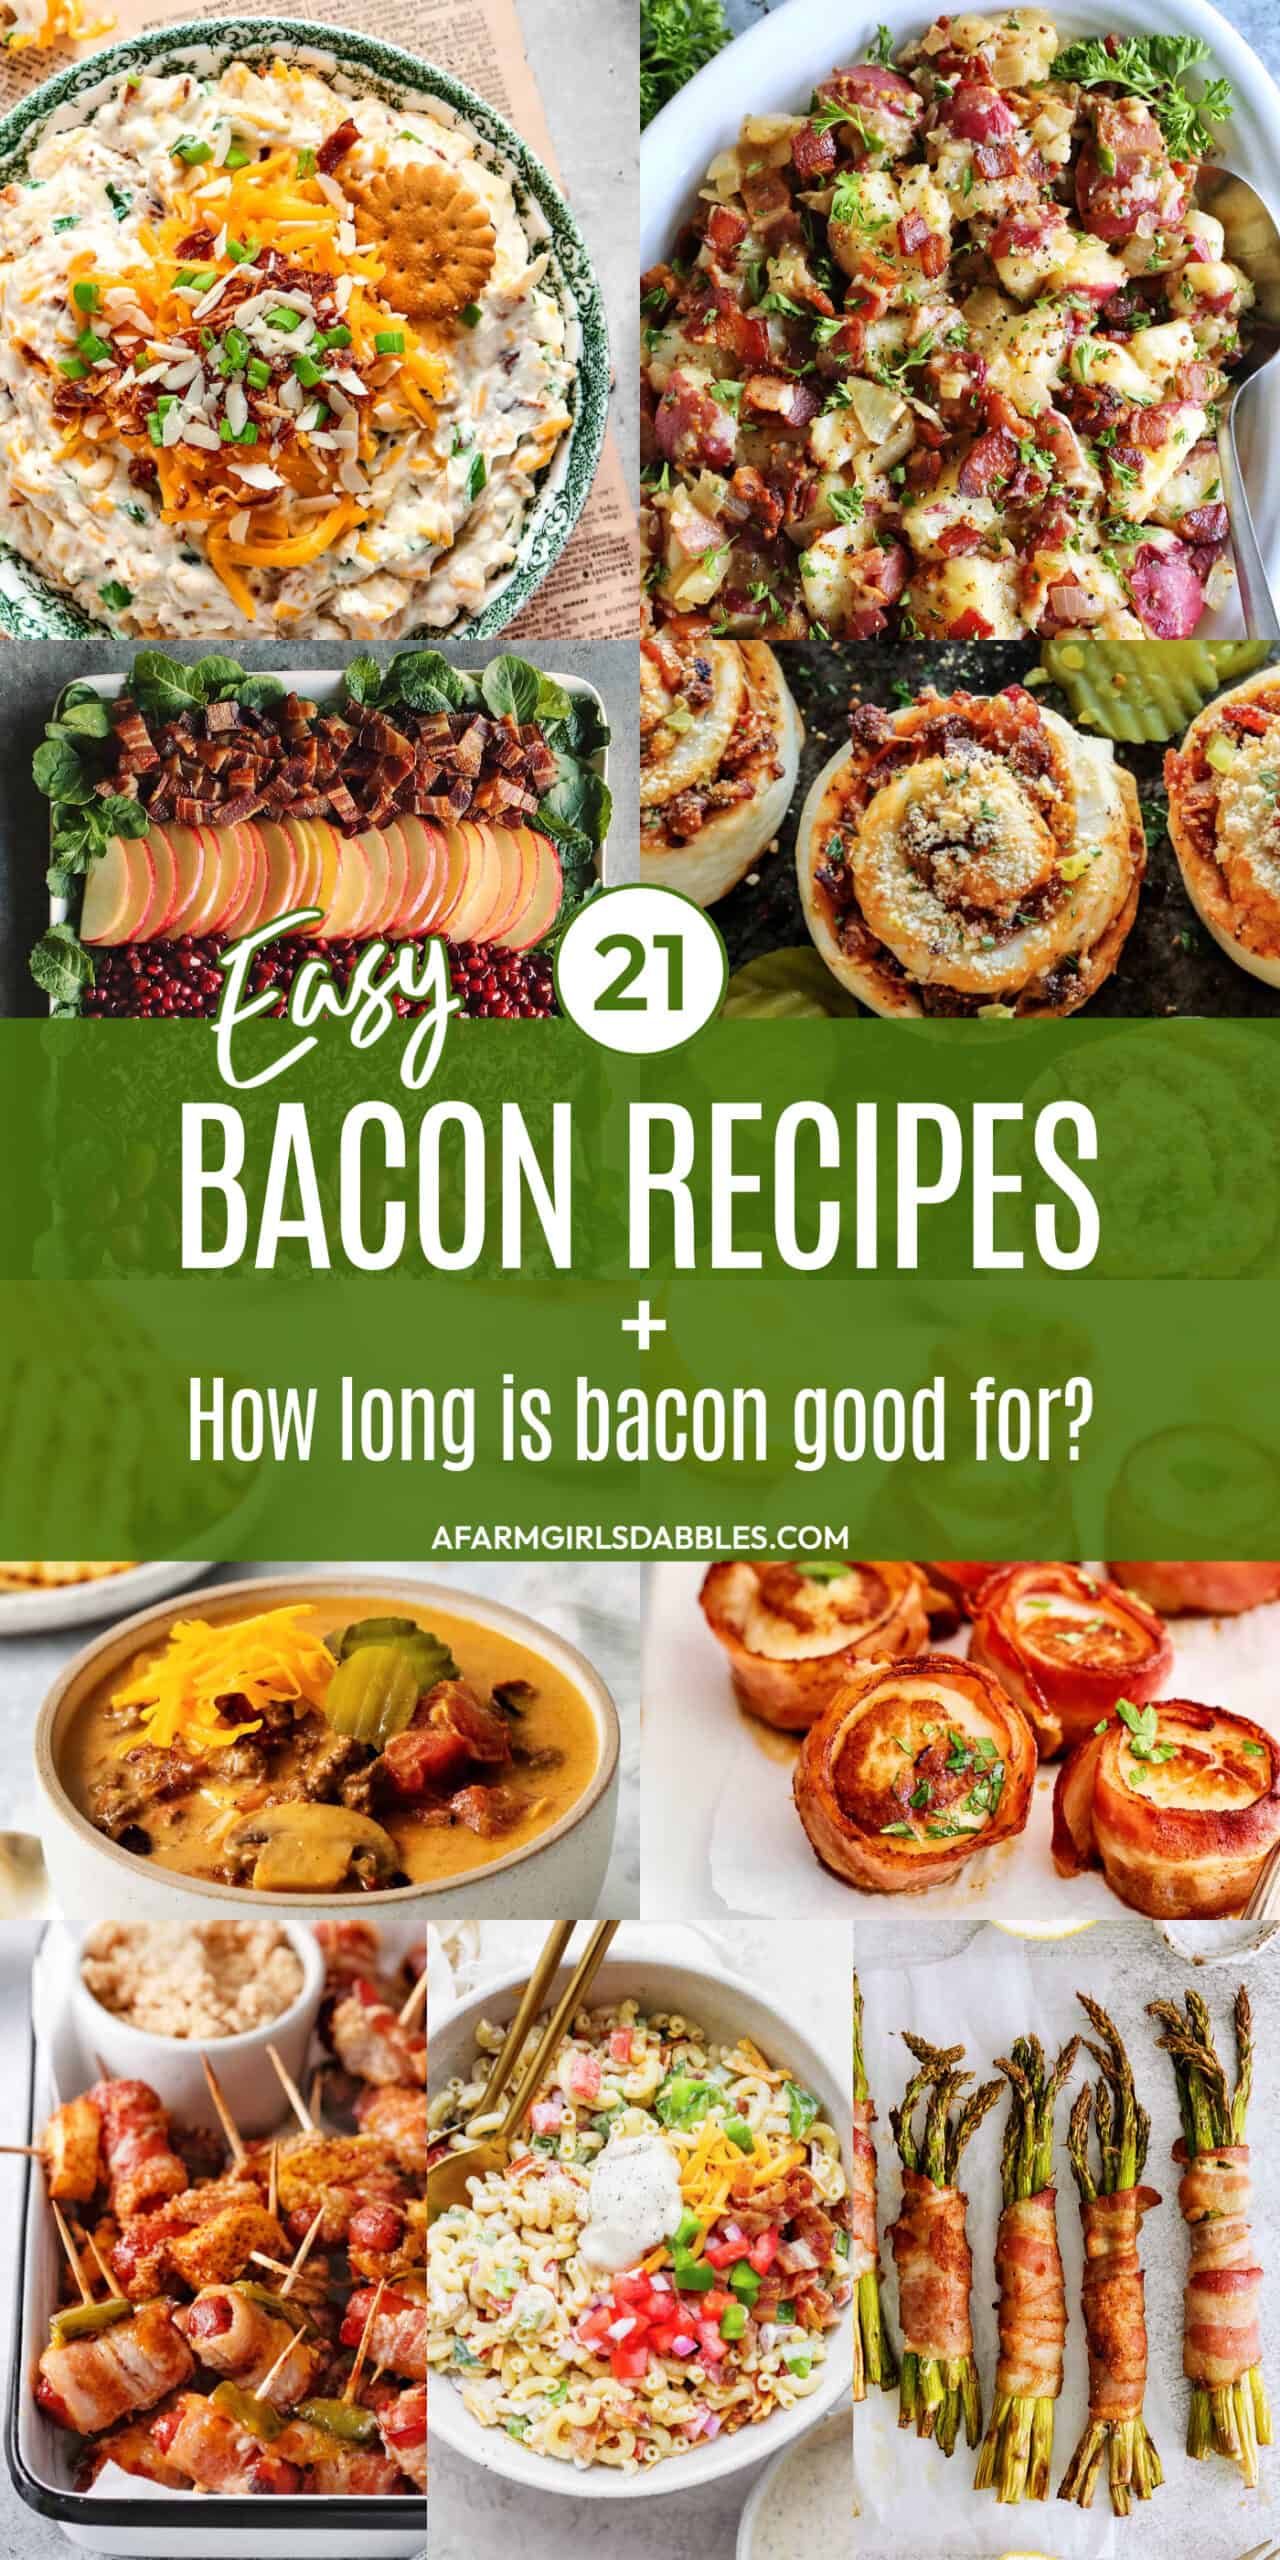 Pinterest image for 21 bacon recipes